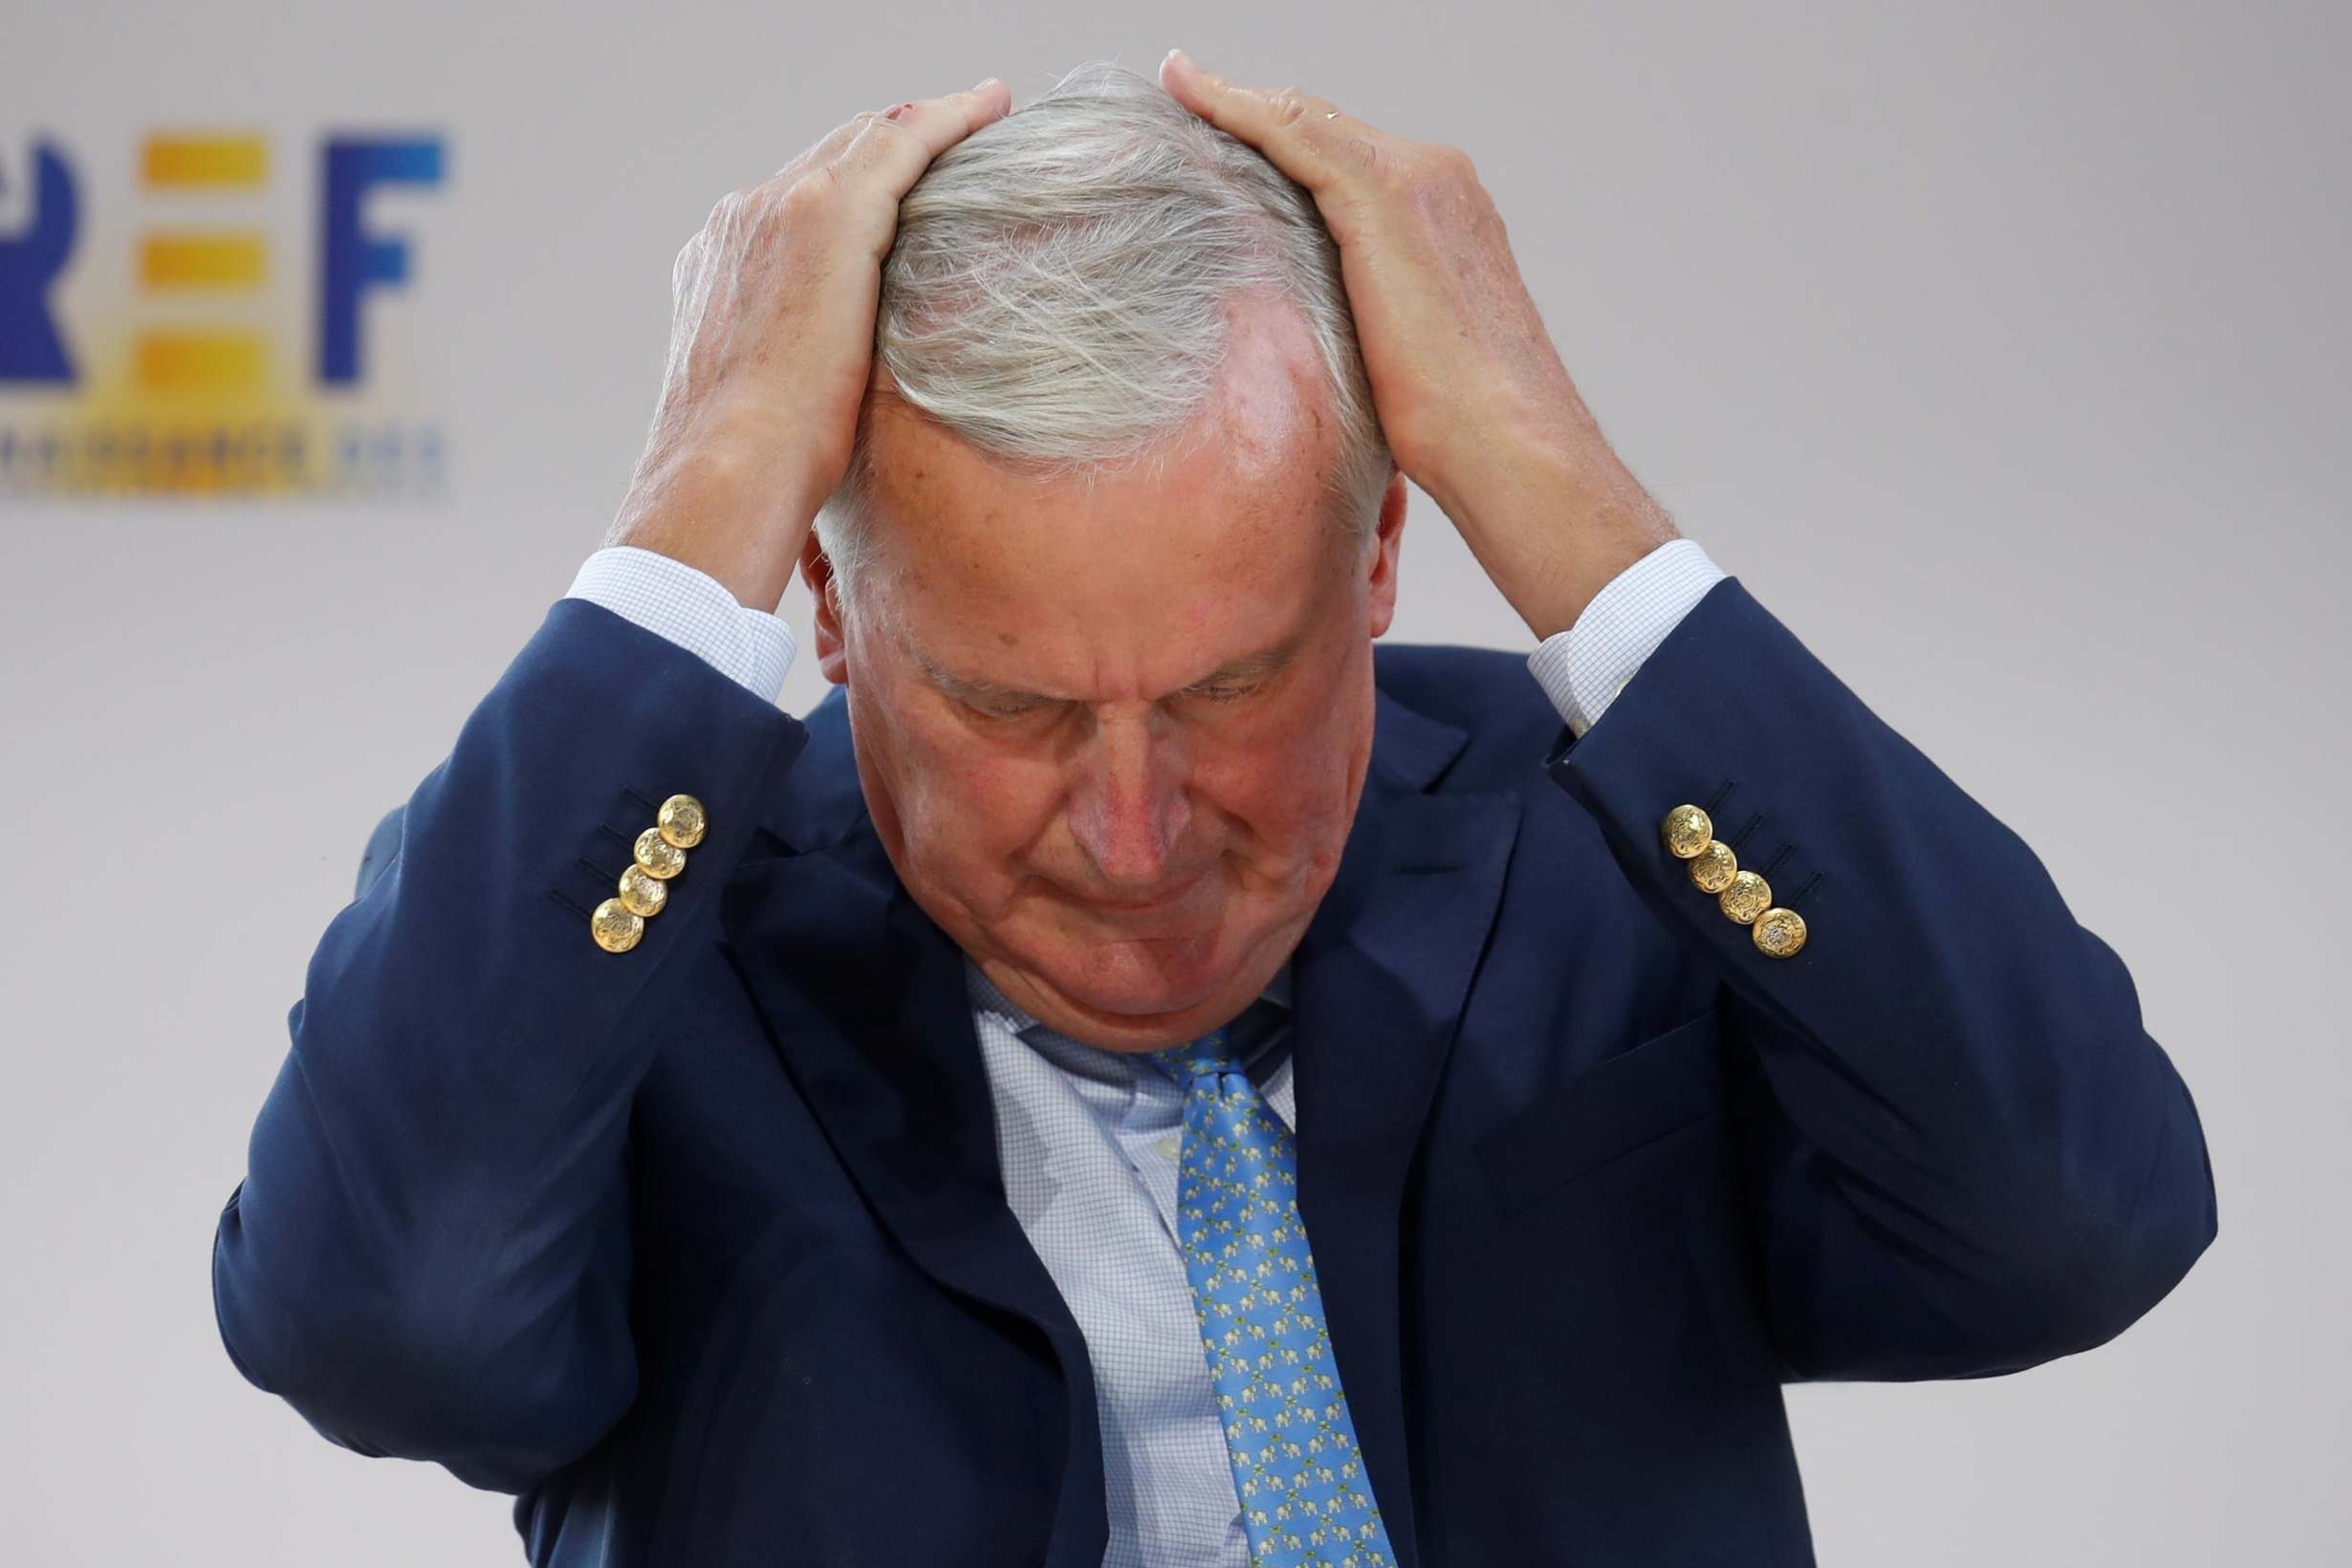 The EU’s Brexit negotiator Michel Barnier recently said trade talks were ‘going backwards more than forwards’ and ‘valuable time’ had been wasted